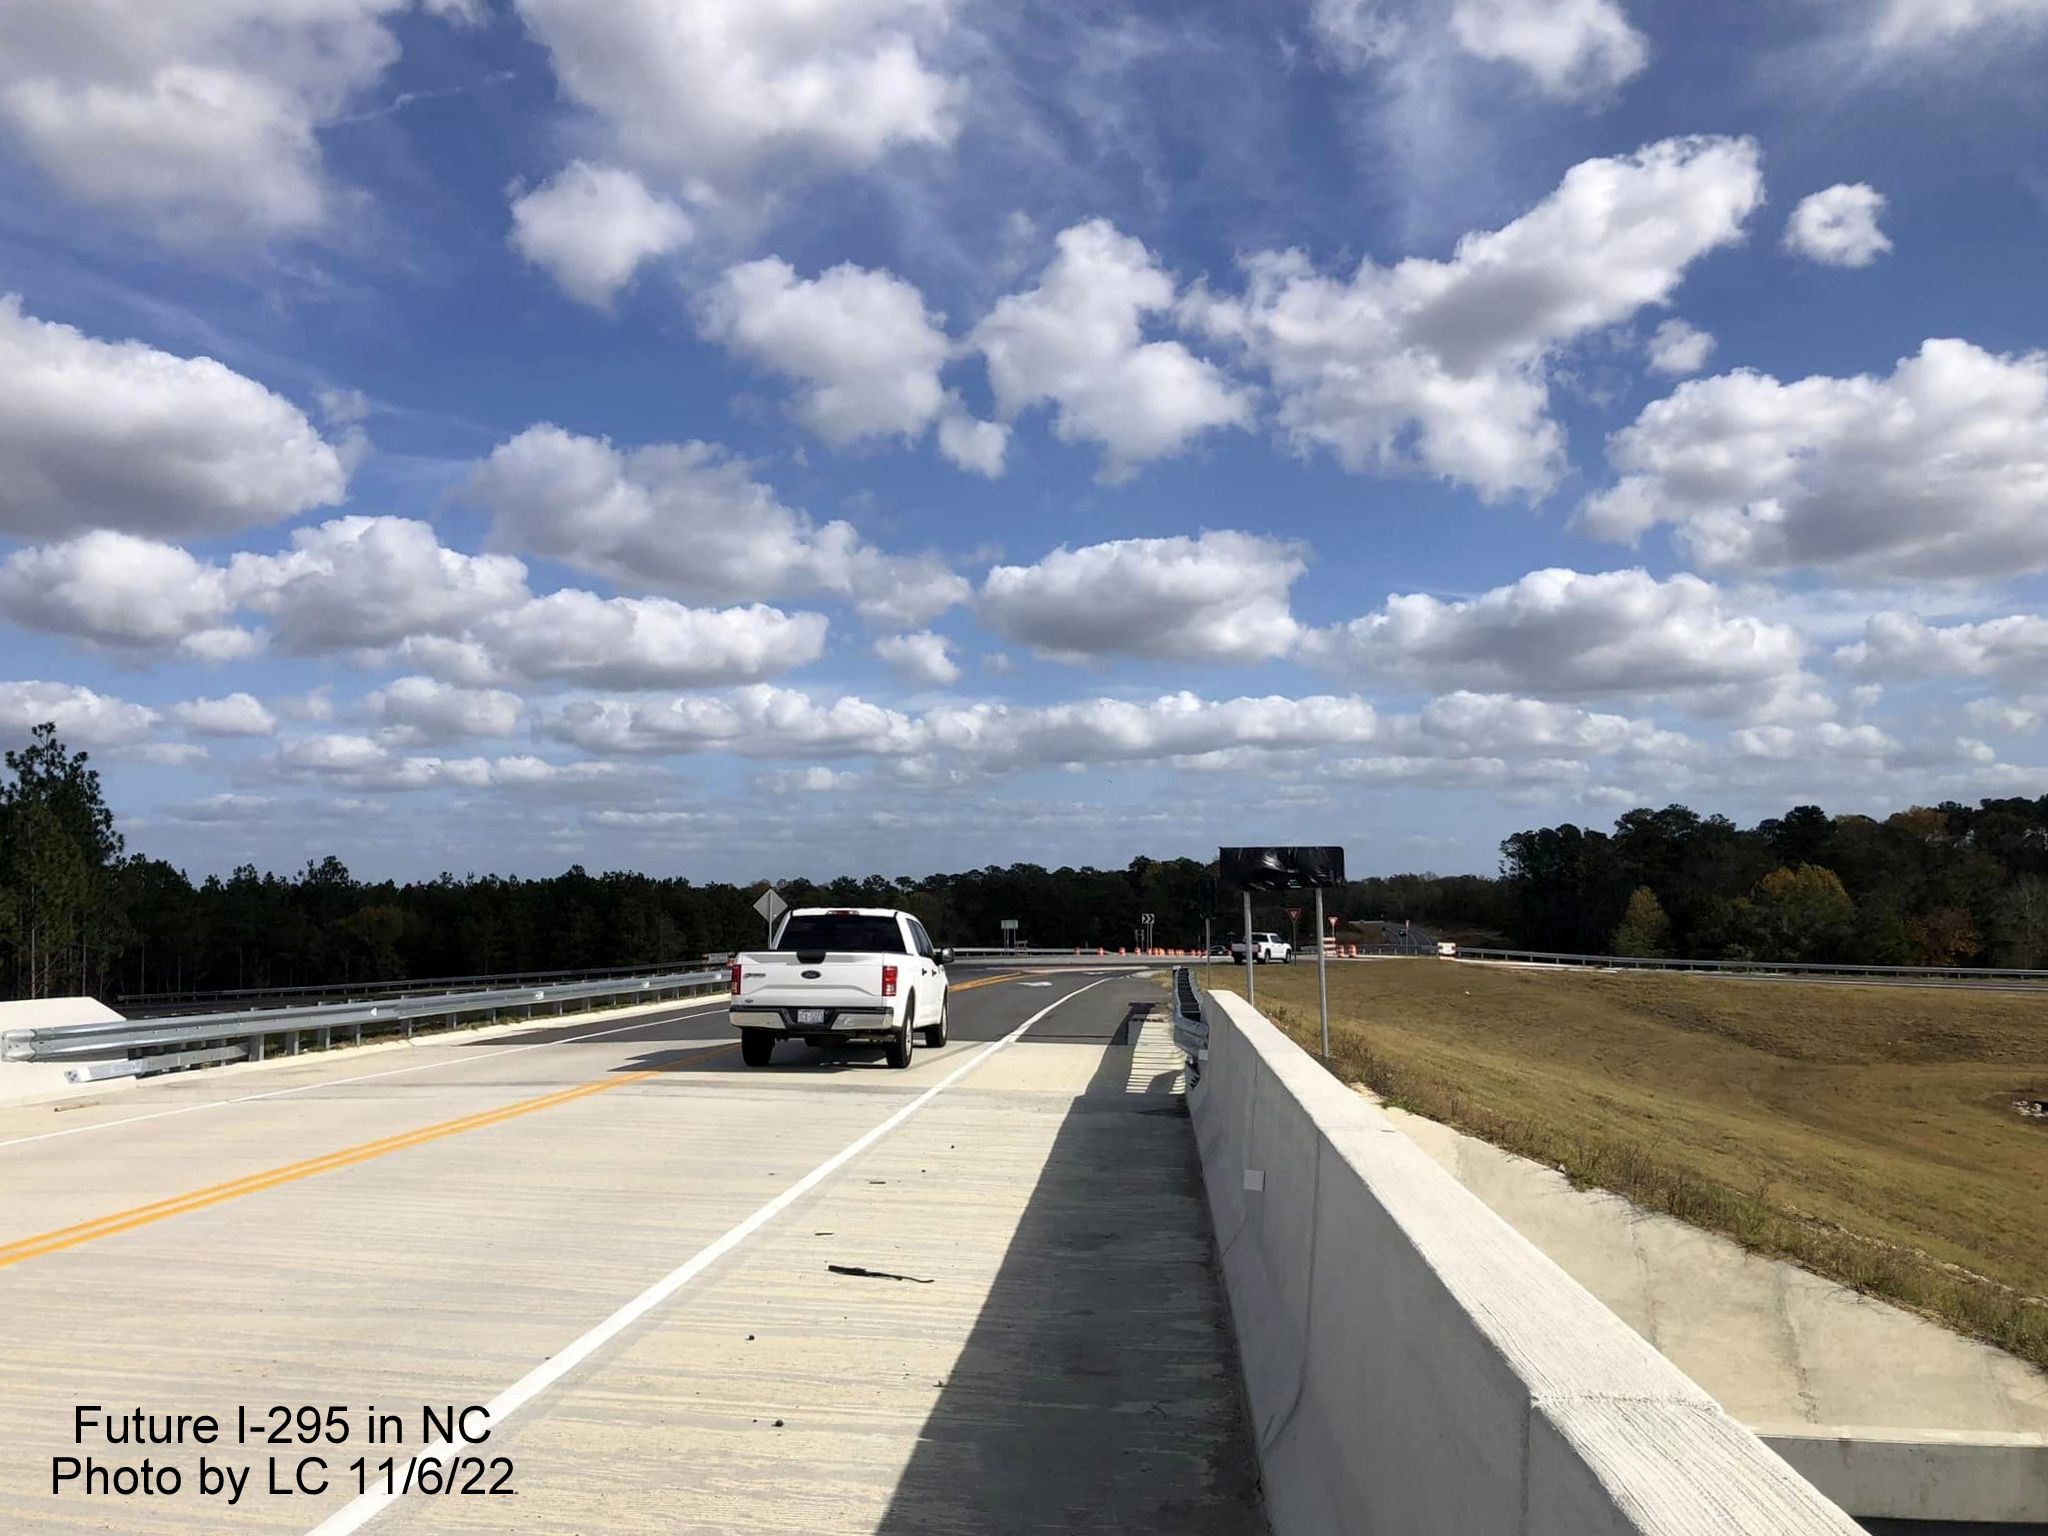 Image taken looking east along Black Bridge Road bridge toward new roundabout with ramps 
        for soon to be opened section of Fayetteville Outer Loop to Parkton/Leeper Roads, by LC, November 2022